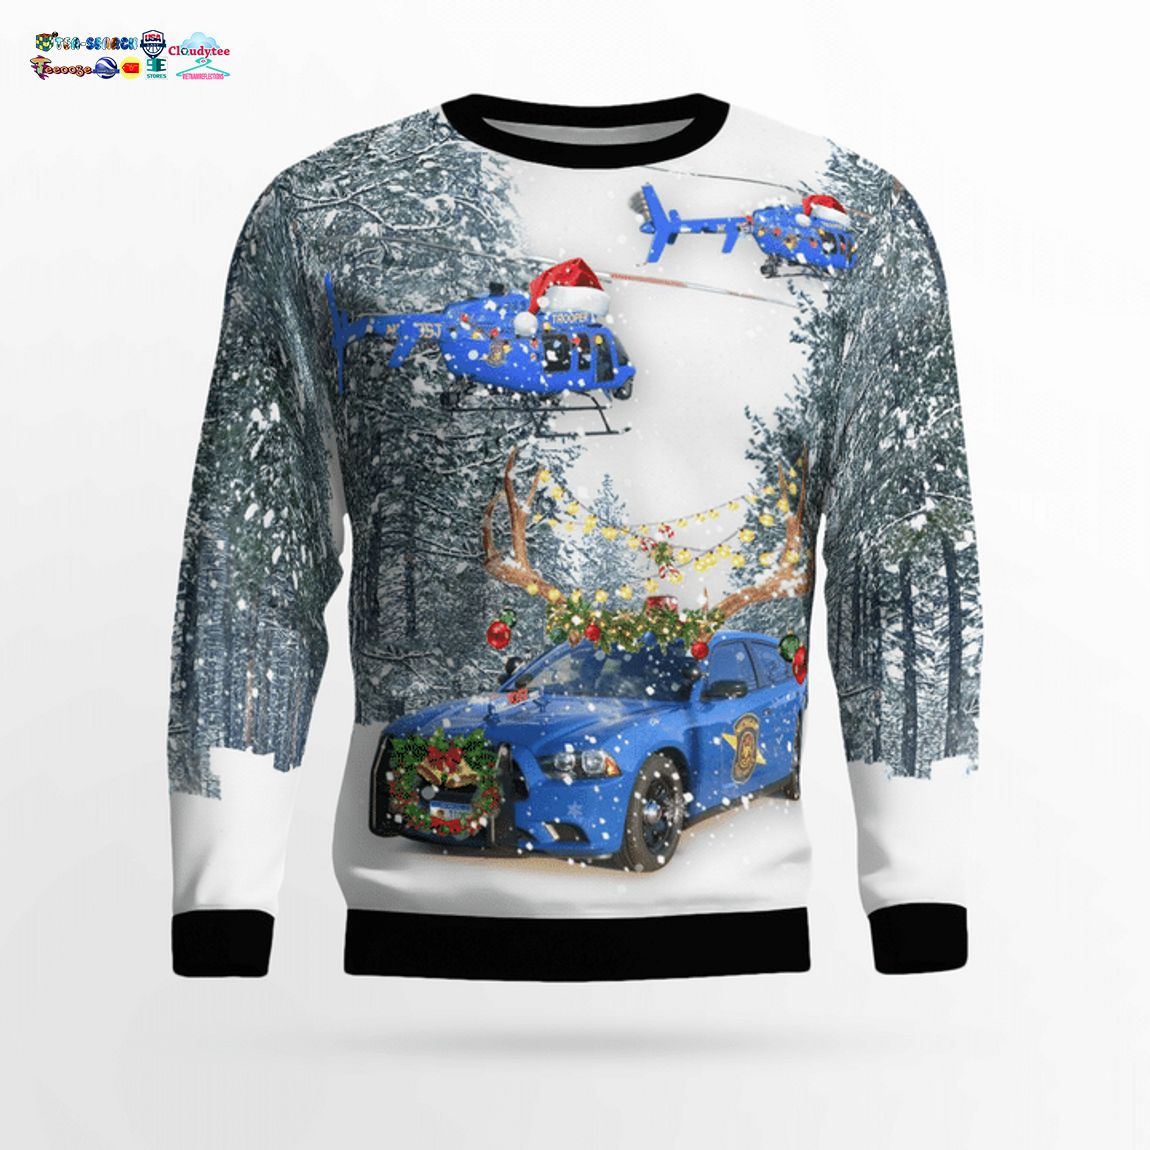 Michigan State Police Dodge Charger And Helicopter 3D Christmas Sweater